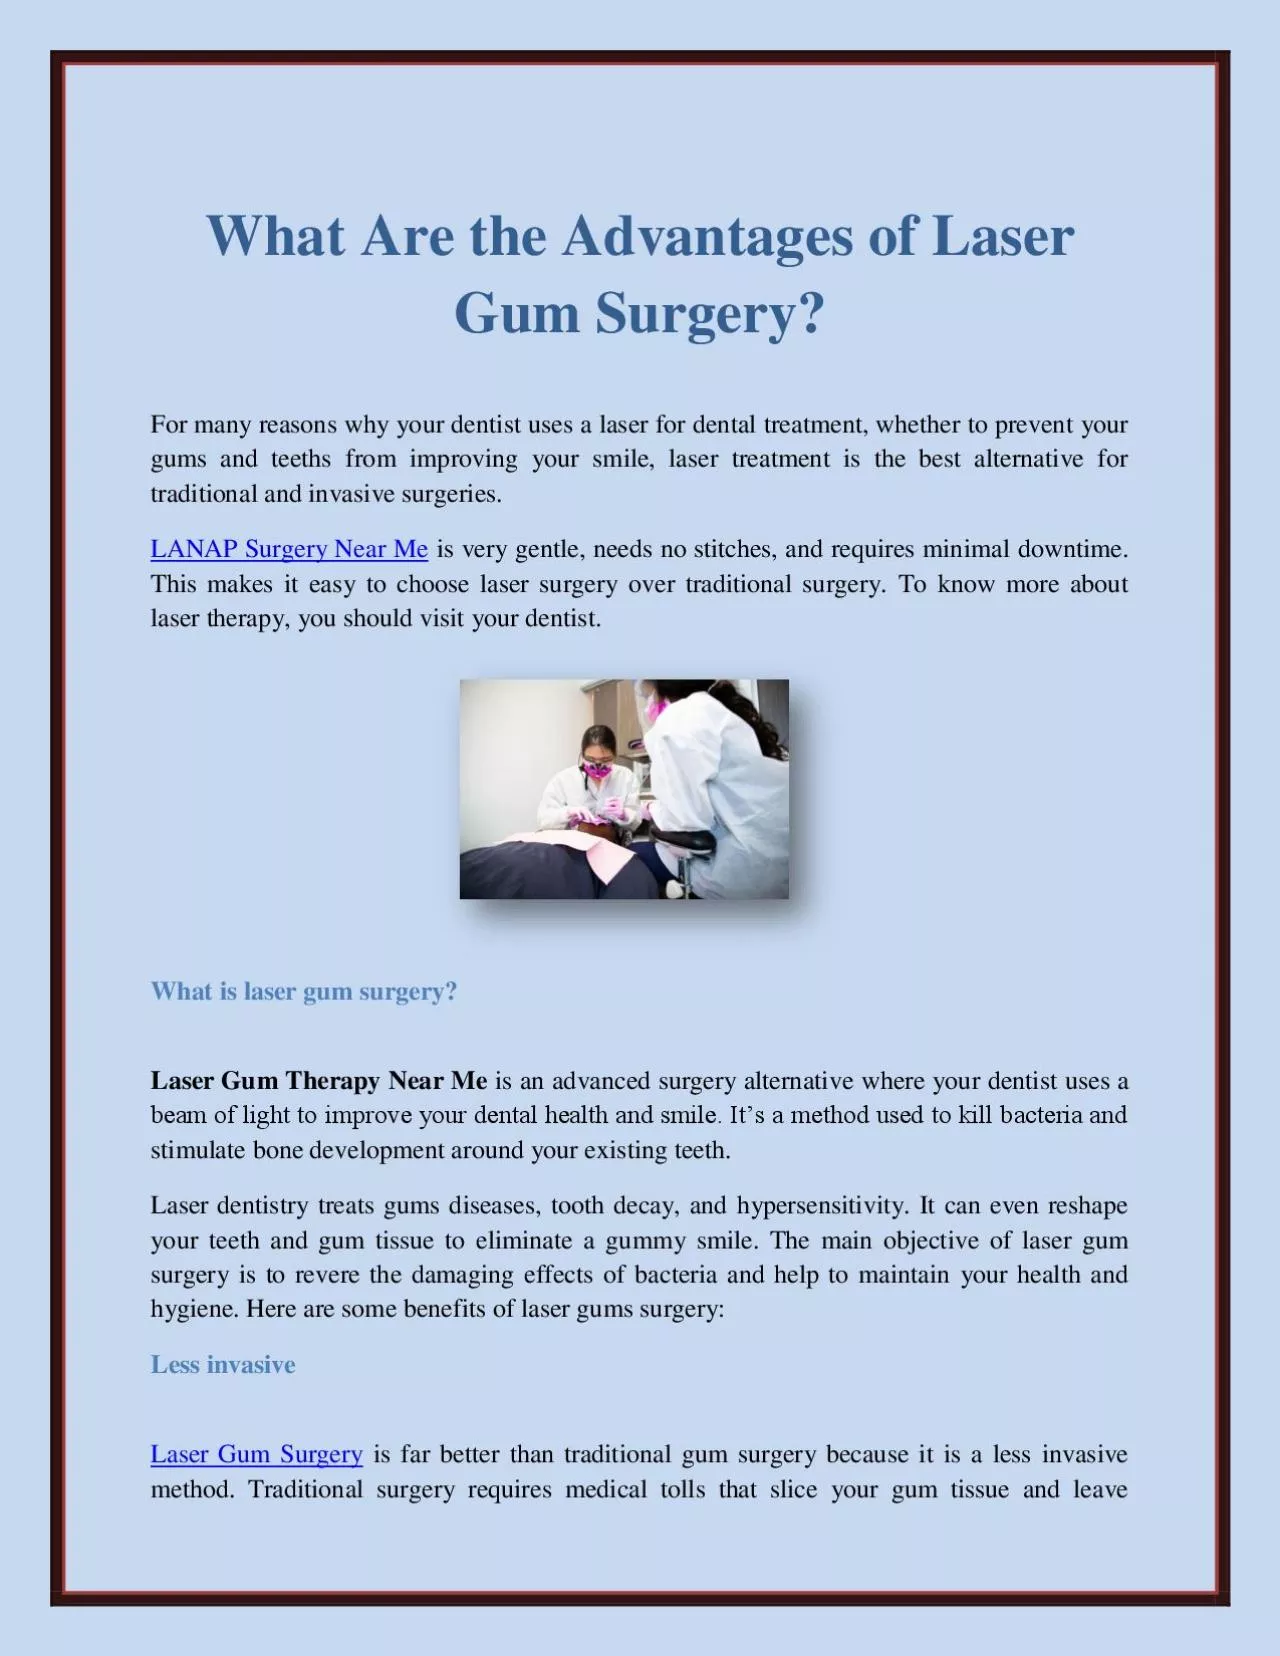 What Are the Advantages of Laser Gum Surgery?